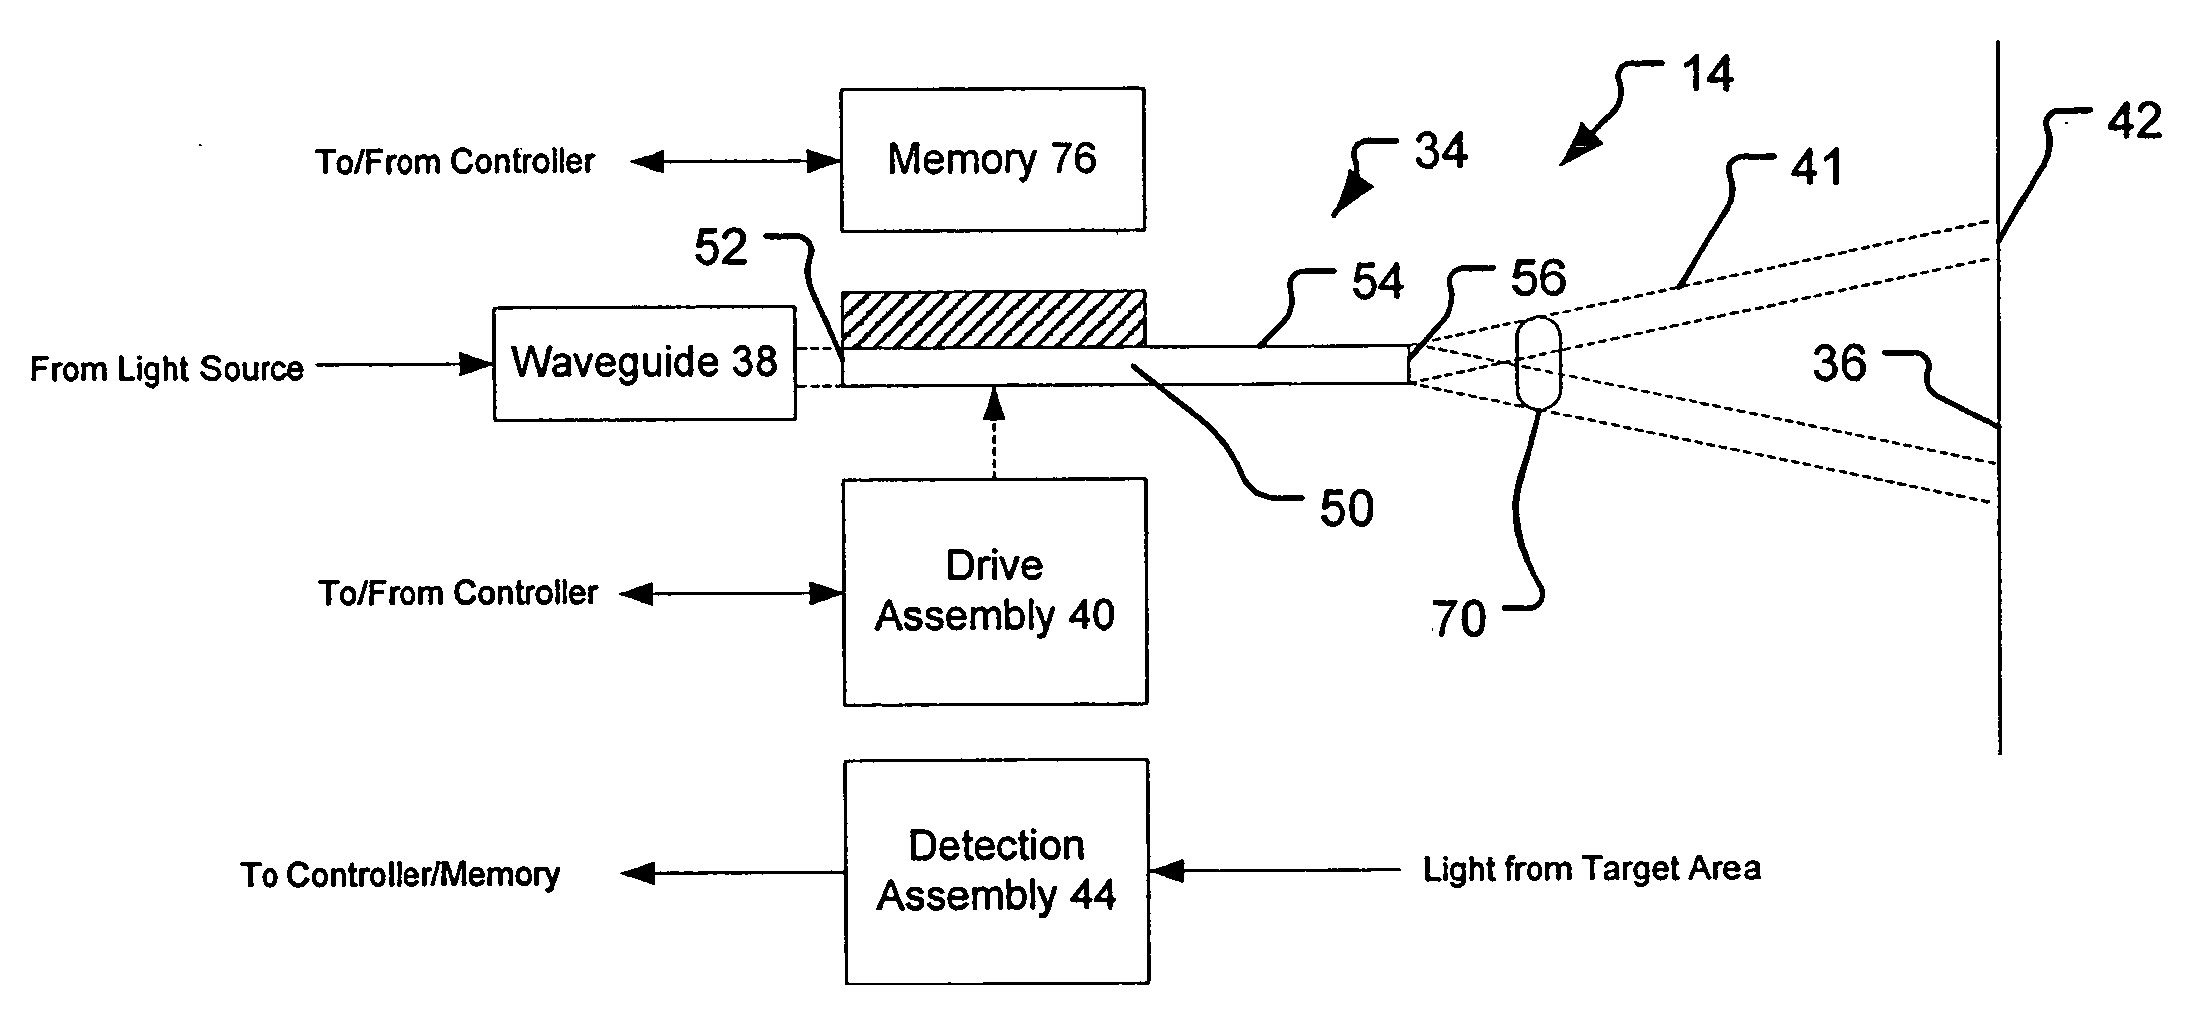 Configuration memory for a scanning beam device